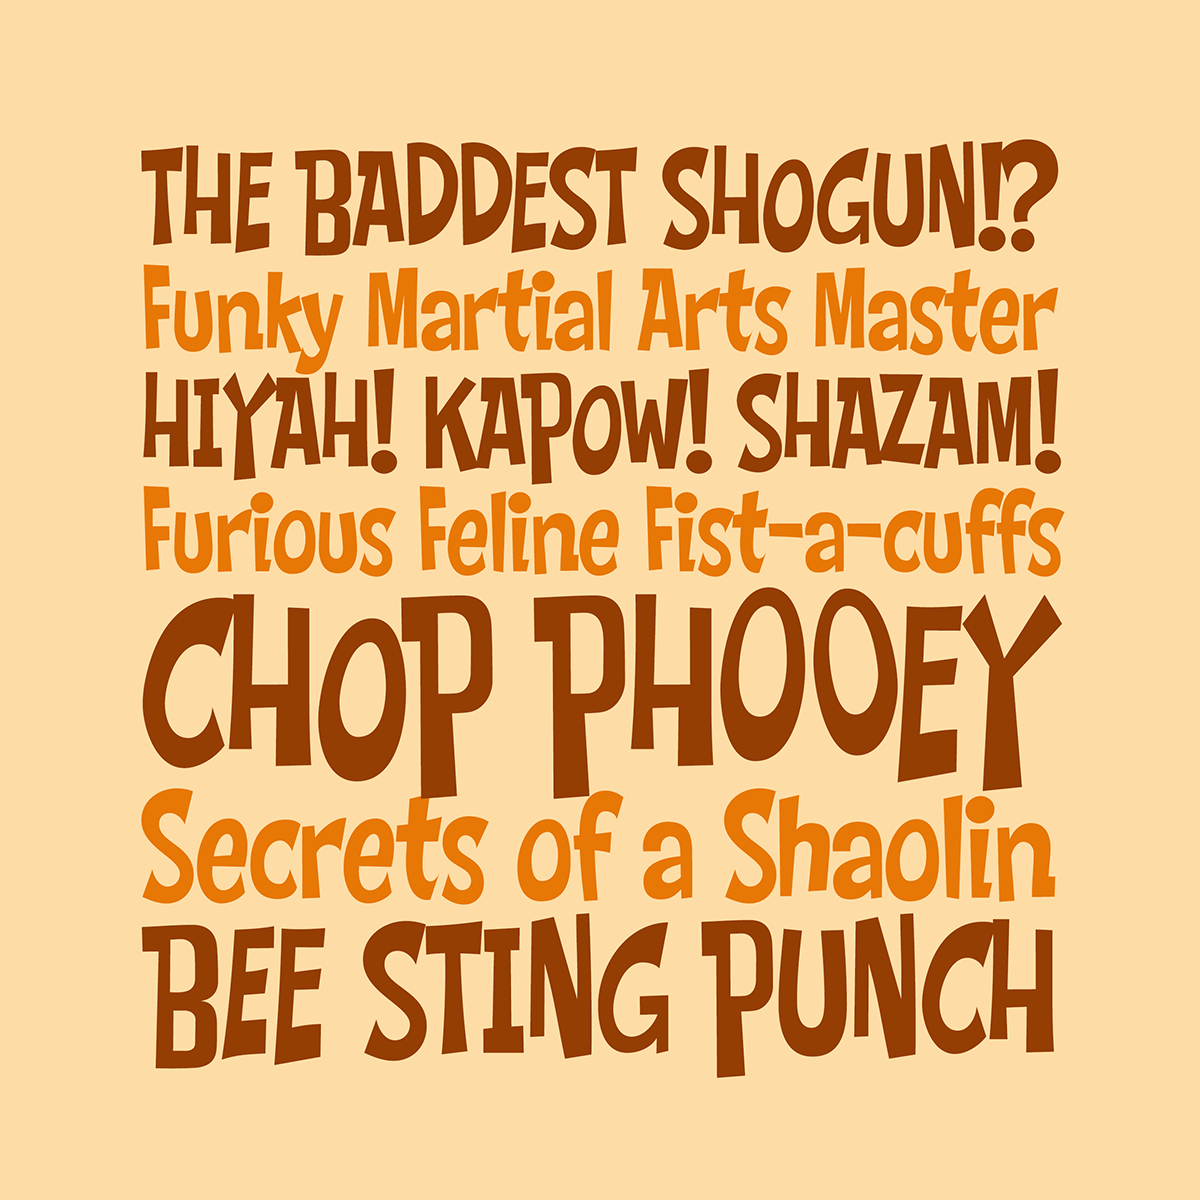 Chop Phooey font by Pink Broccoli